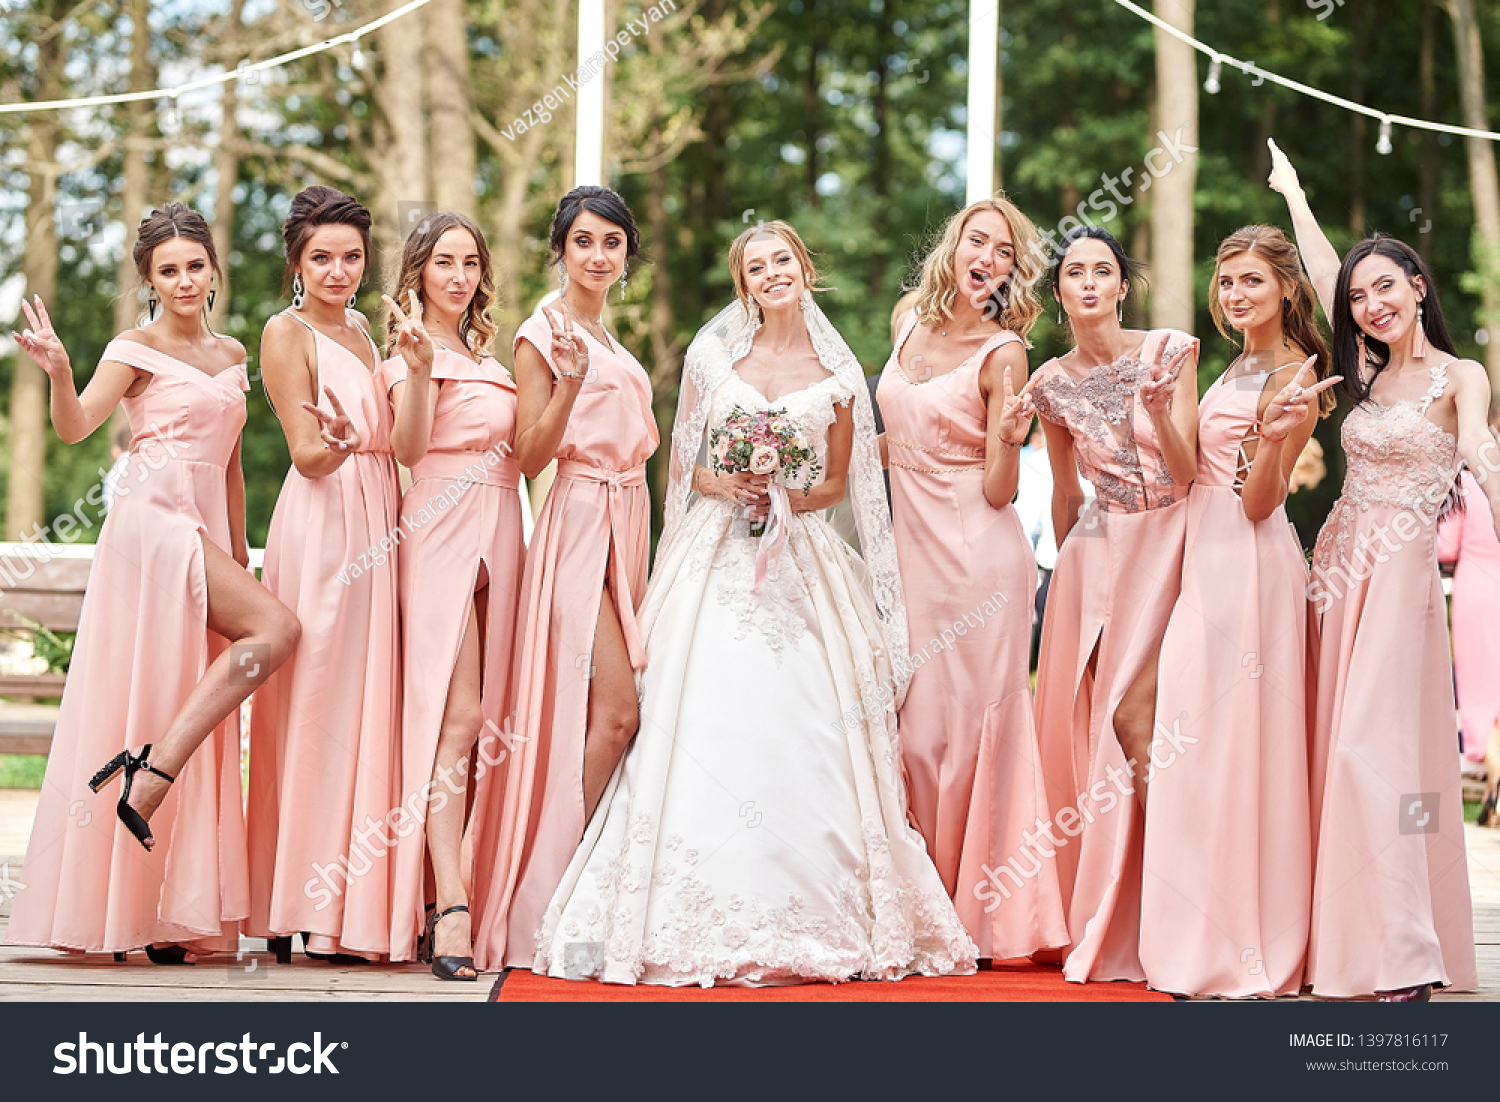 Beautiful bride and bridesmaids posing on the park on the wedding day. Bridesmaids dresses. Portrait of the bride and bridesmaids.Wedding day.  #1397816117